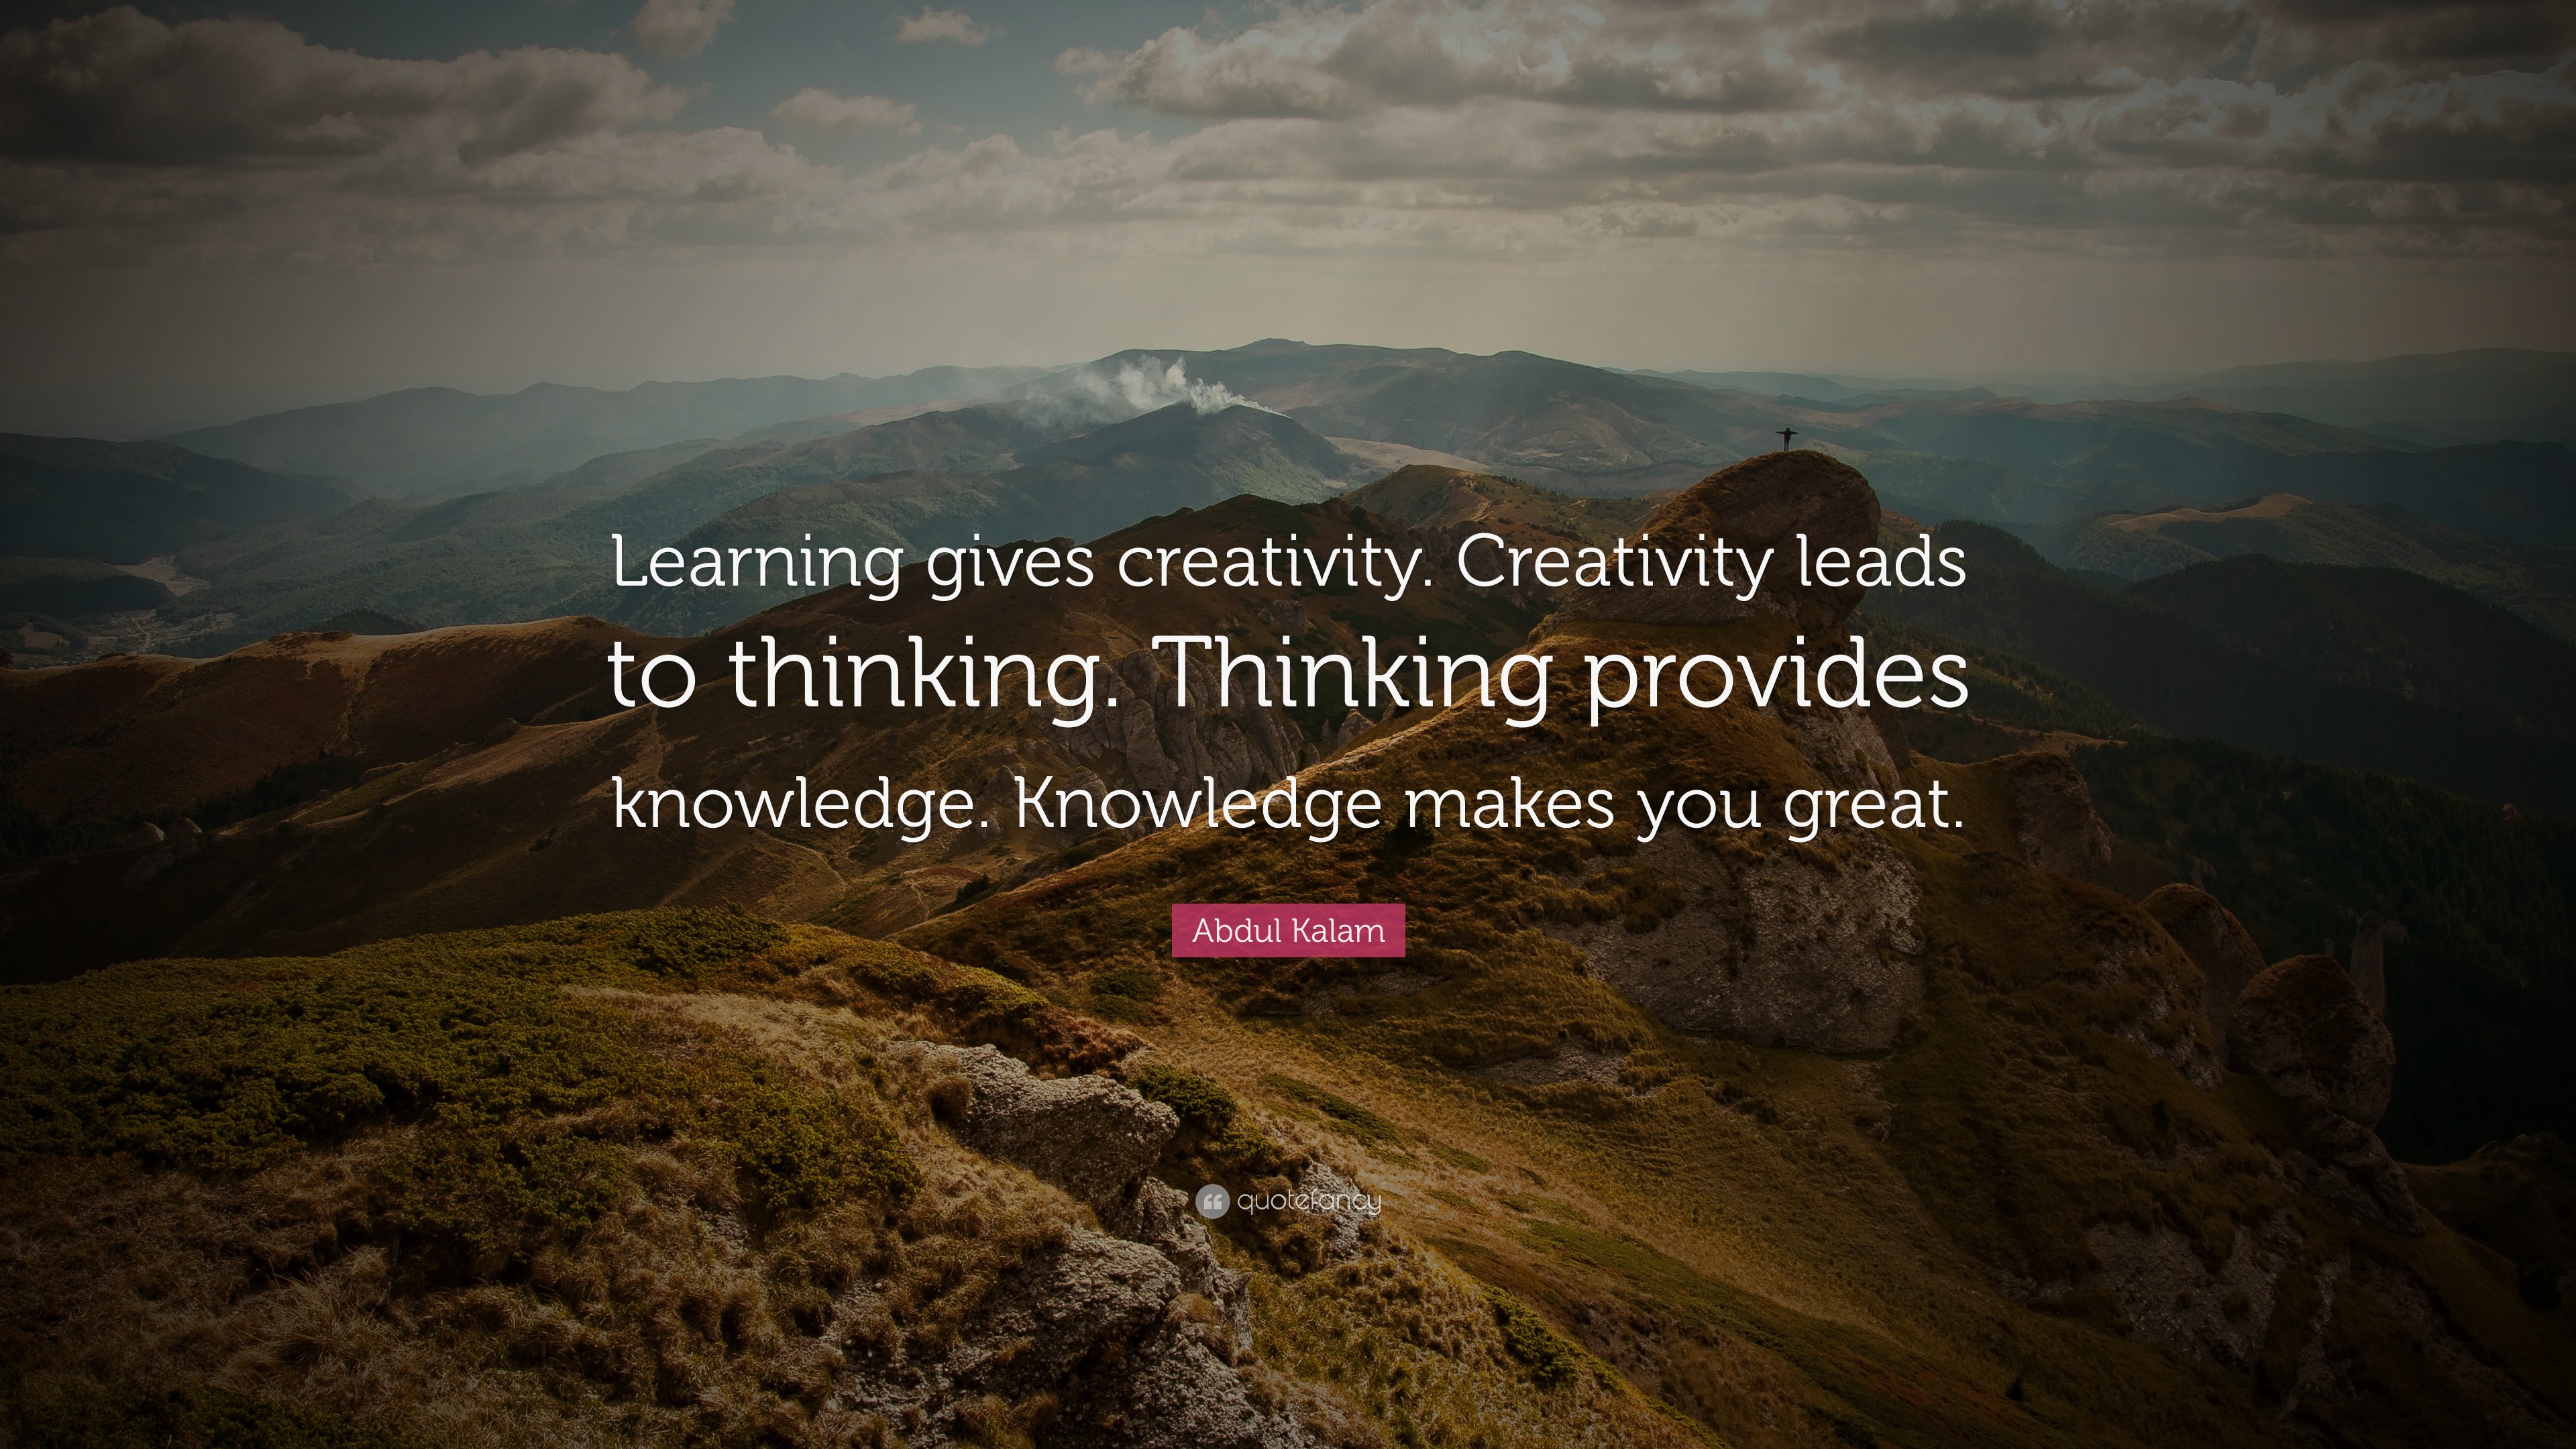 Abdul Kalam Quote “Learning gives creativity. Creativity